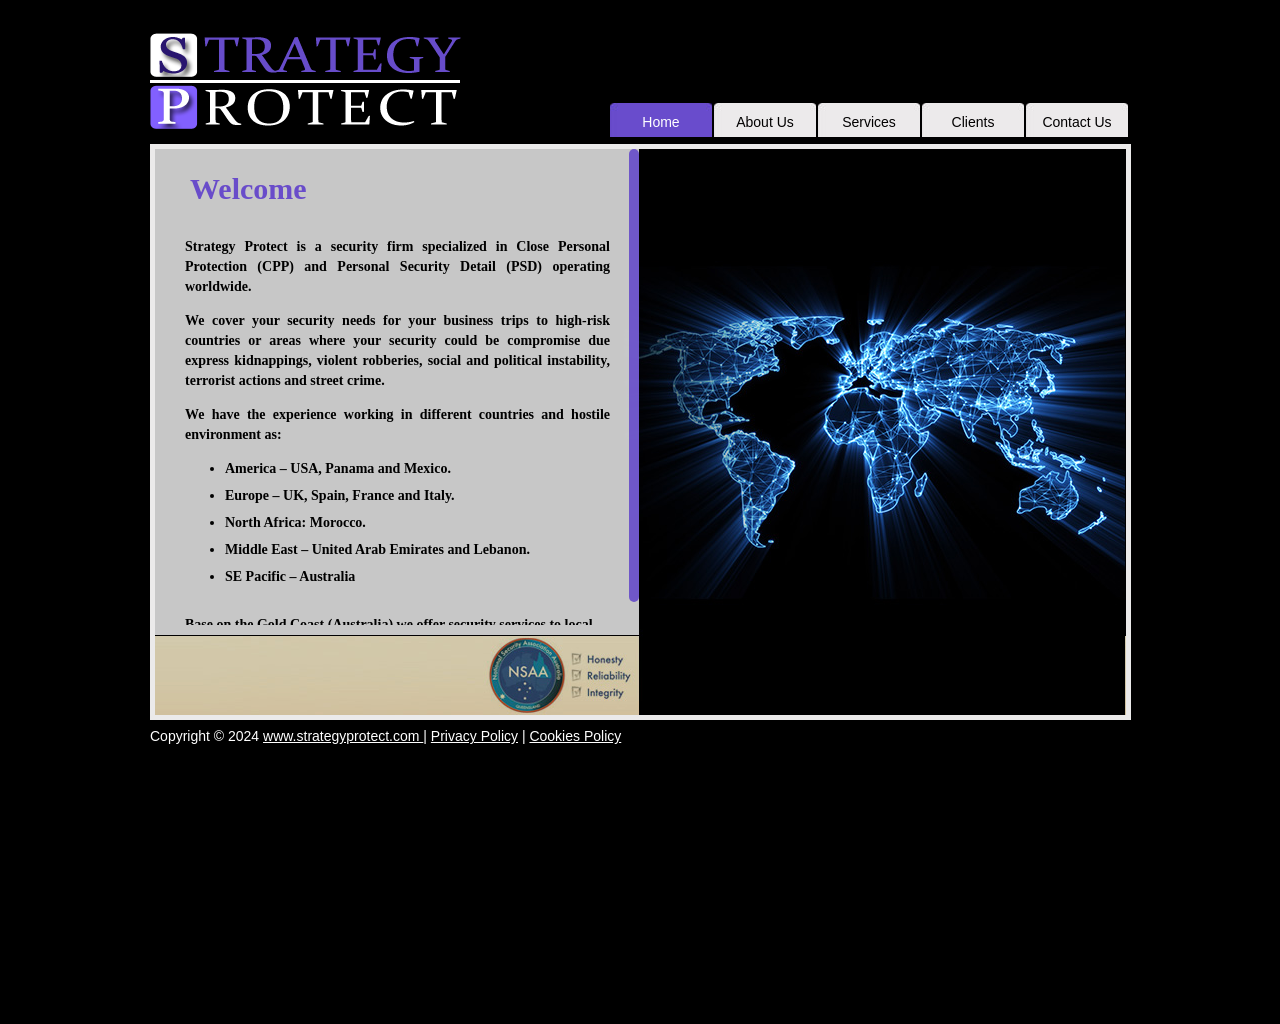 strategyprotect.com